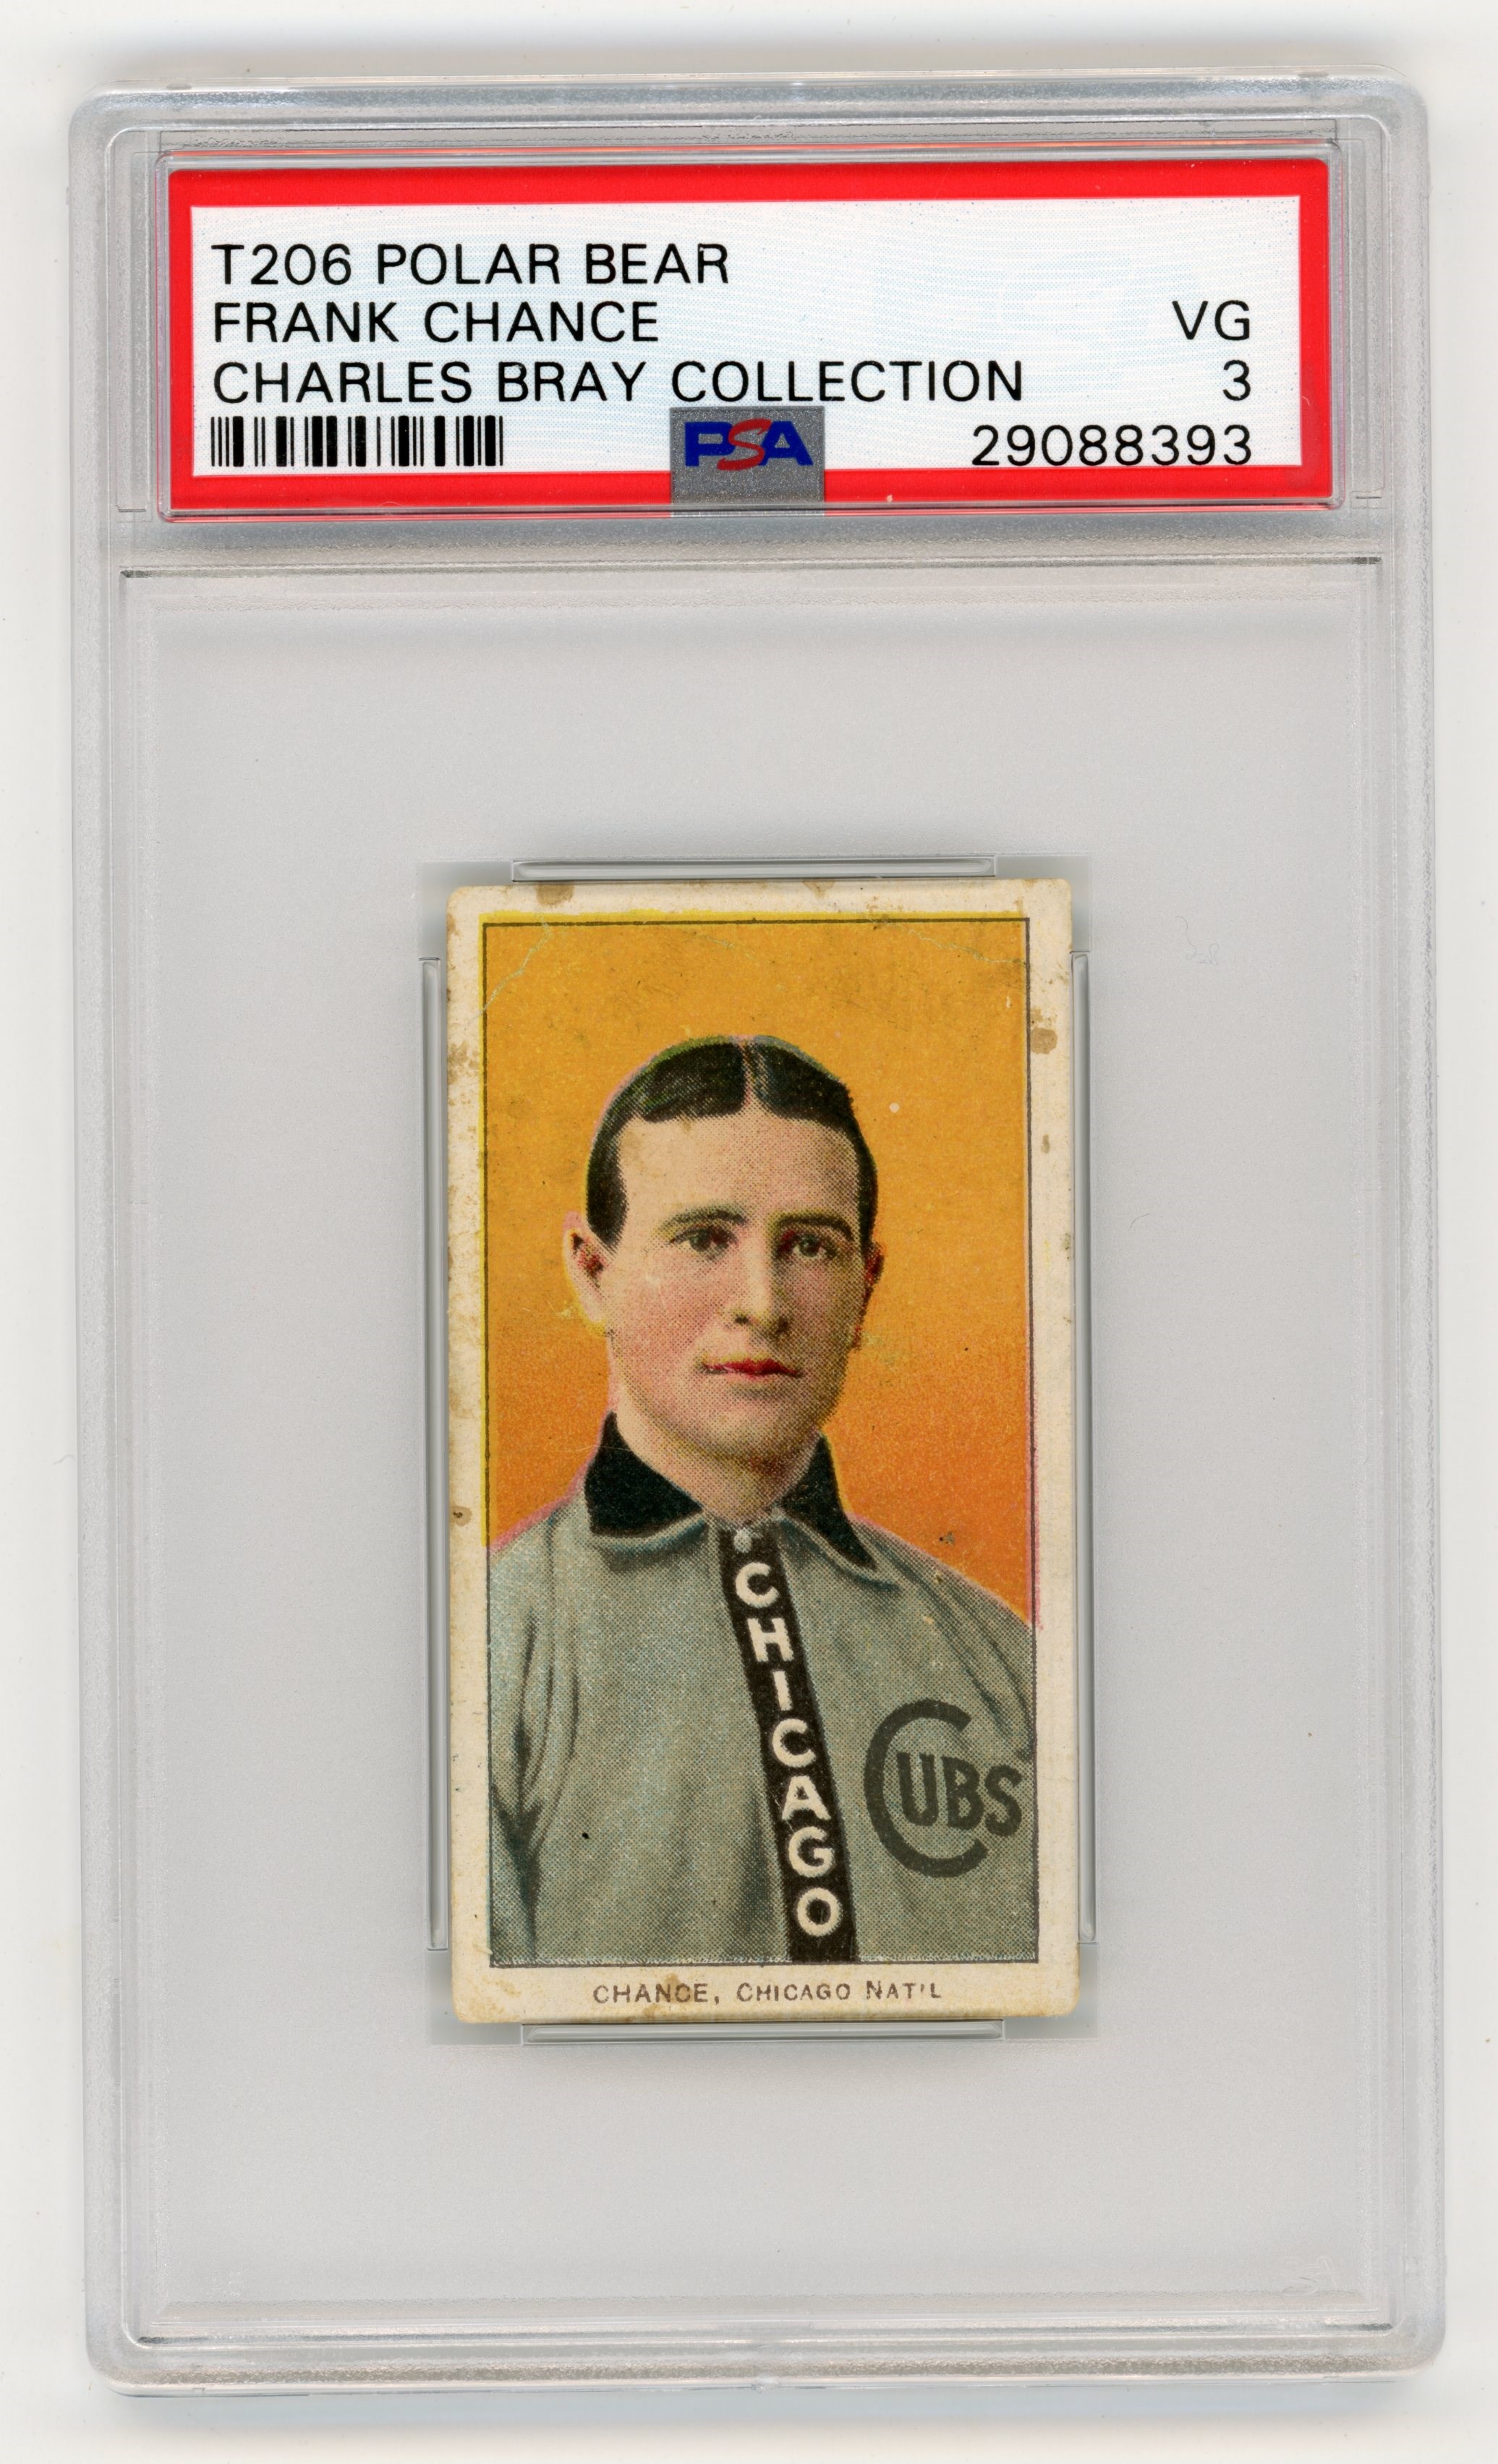 - T206 Polar Bear Frank Chance PSA 3 From Charles Bray Collection